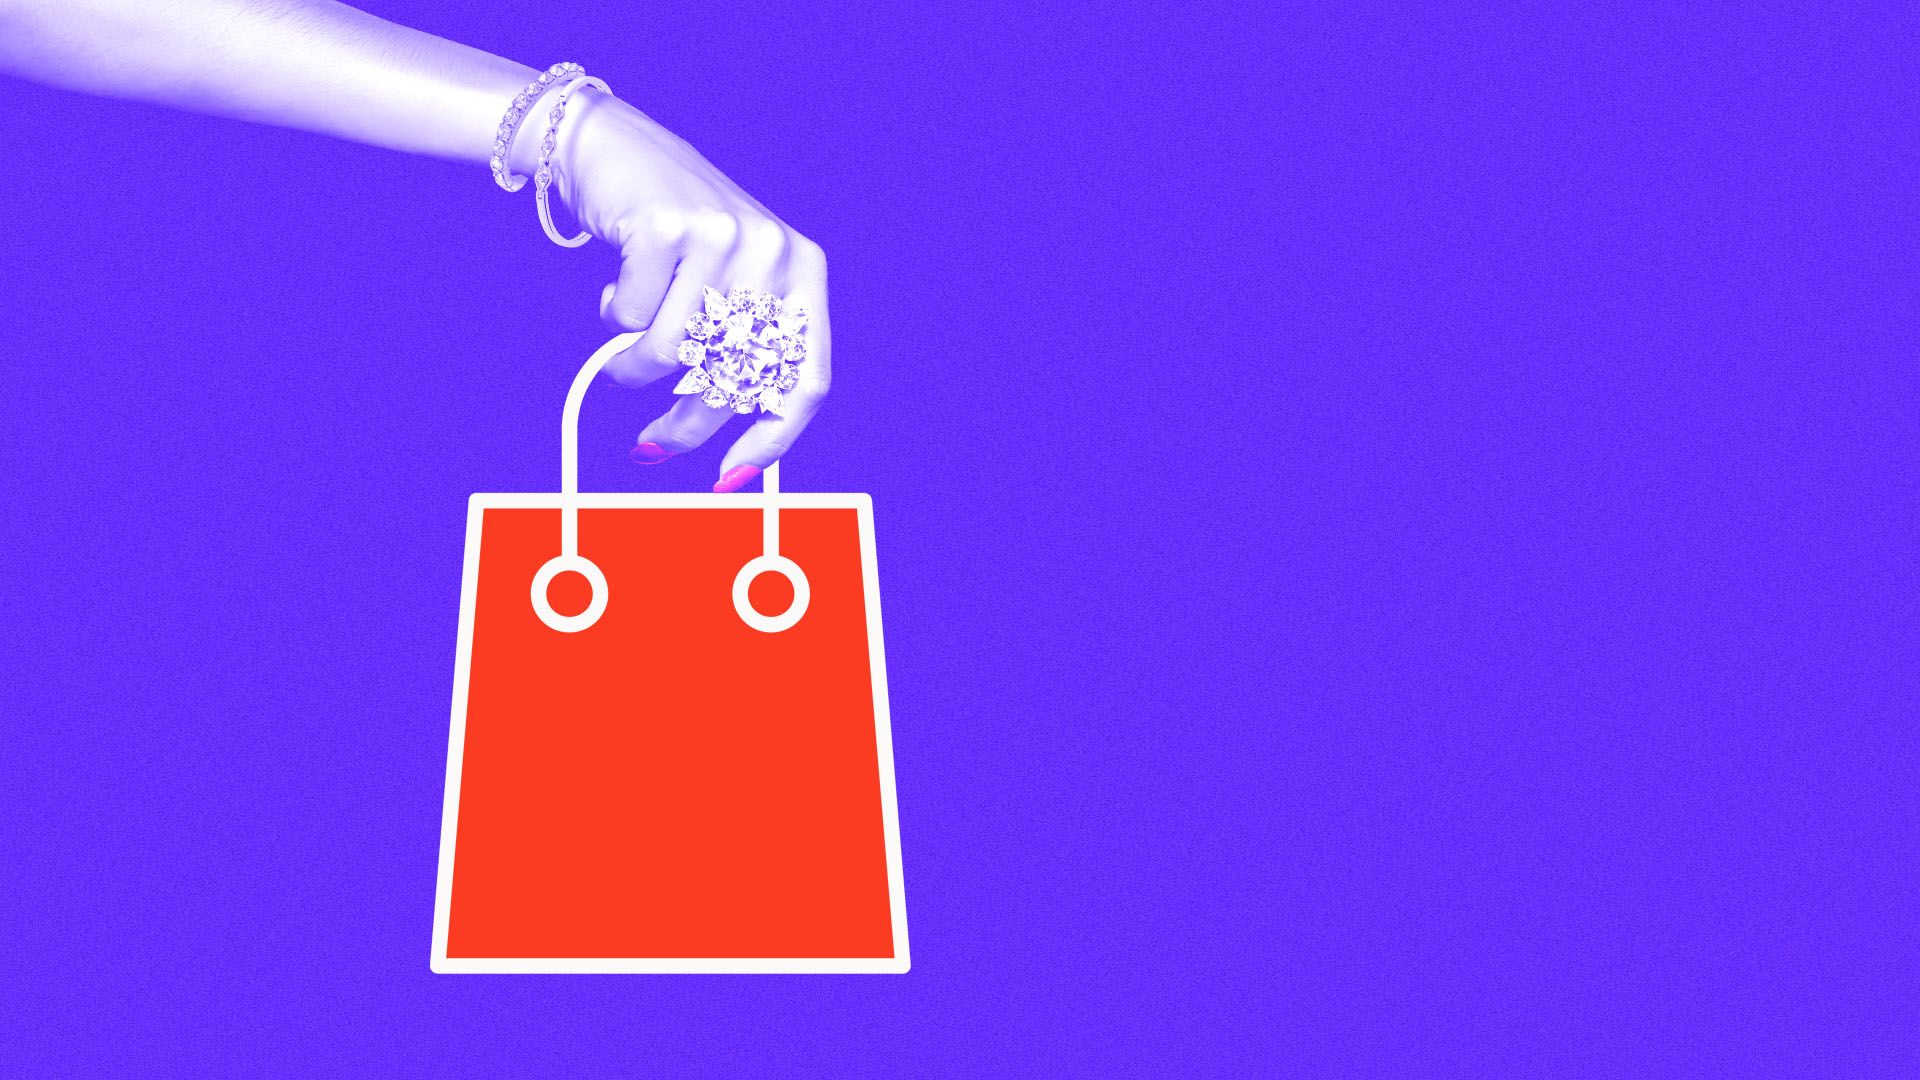 Illustration of a hand covered in jewelry holding a computer icon shopping bag